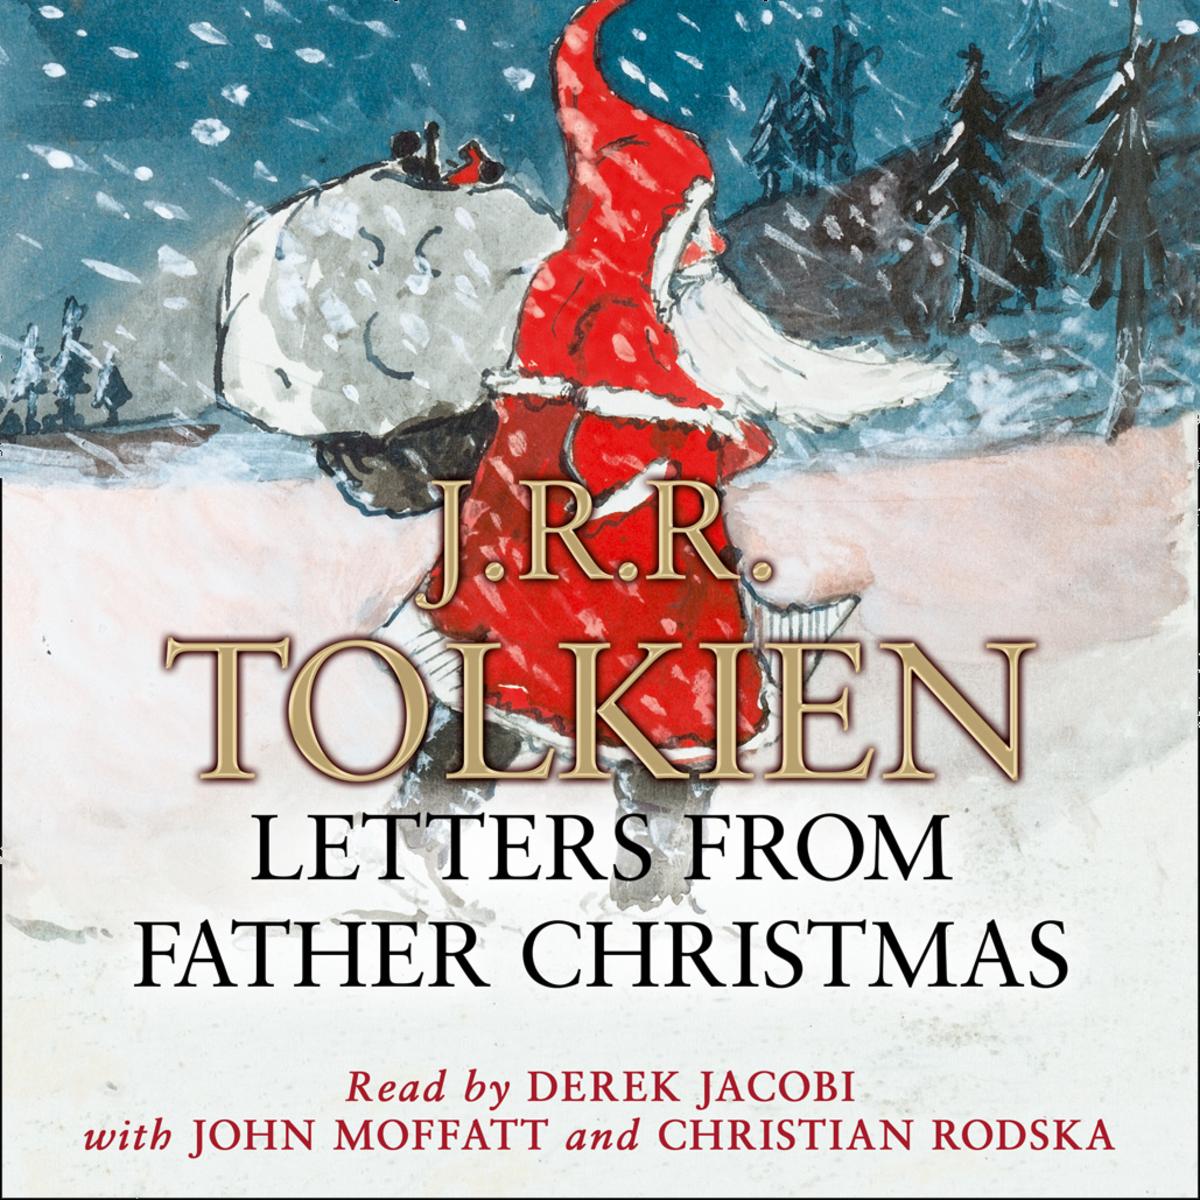 jrr tolkien letters from father christmas hardback